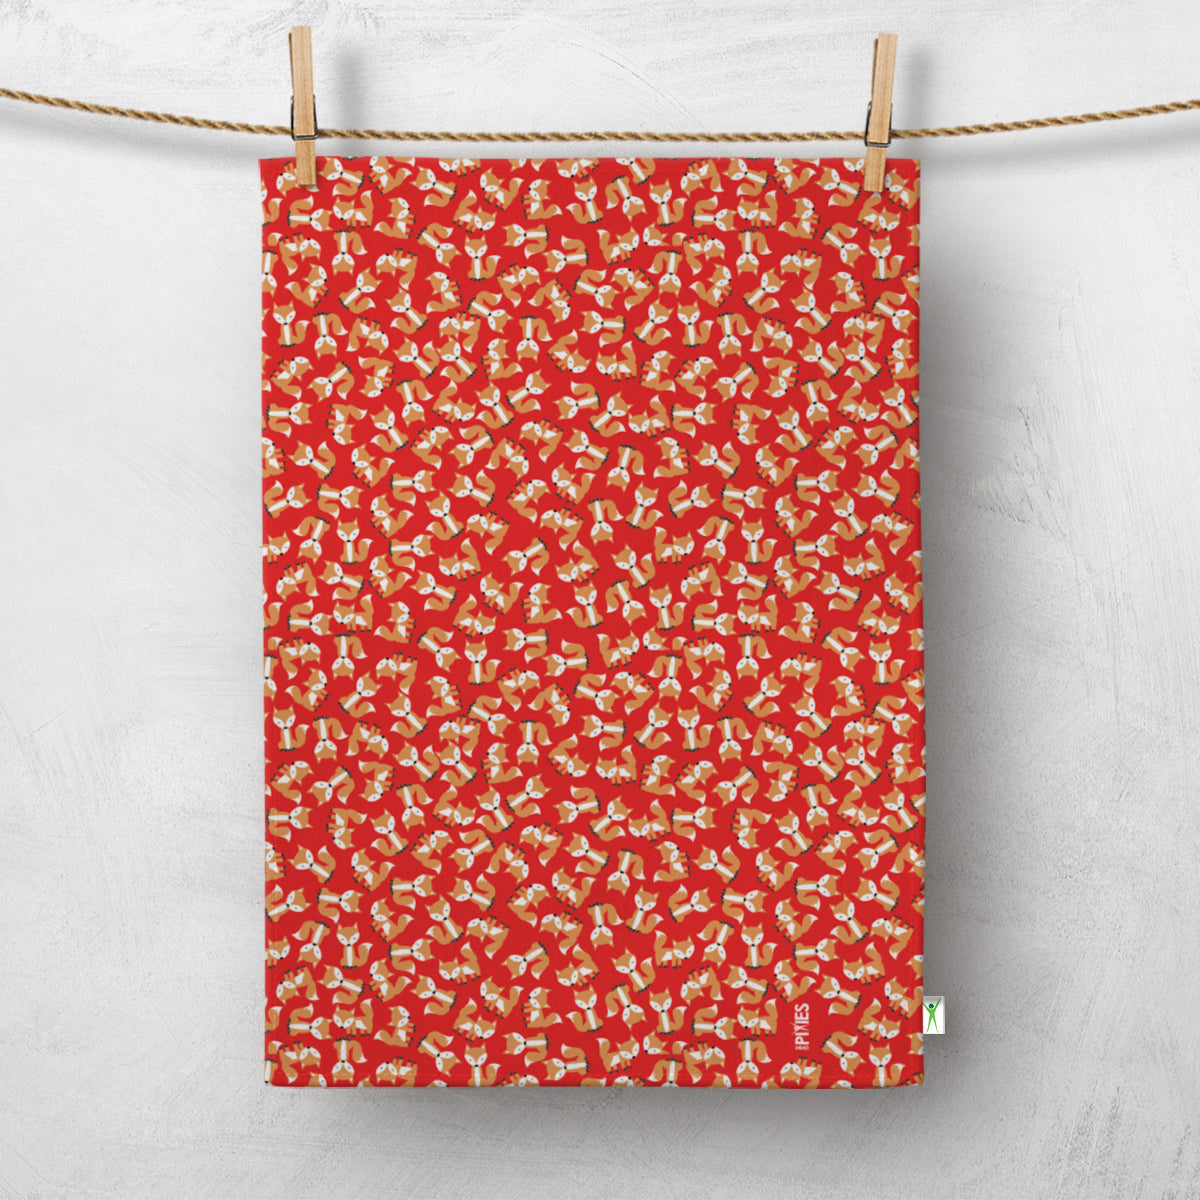 Red Fox Scatter Tea Towel in organic Cotton from UmmPixies. Designed and made in the UK